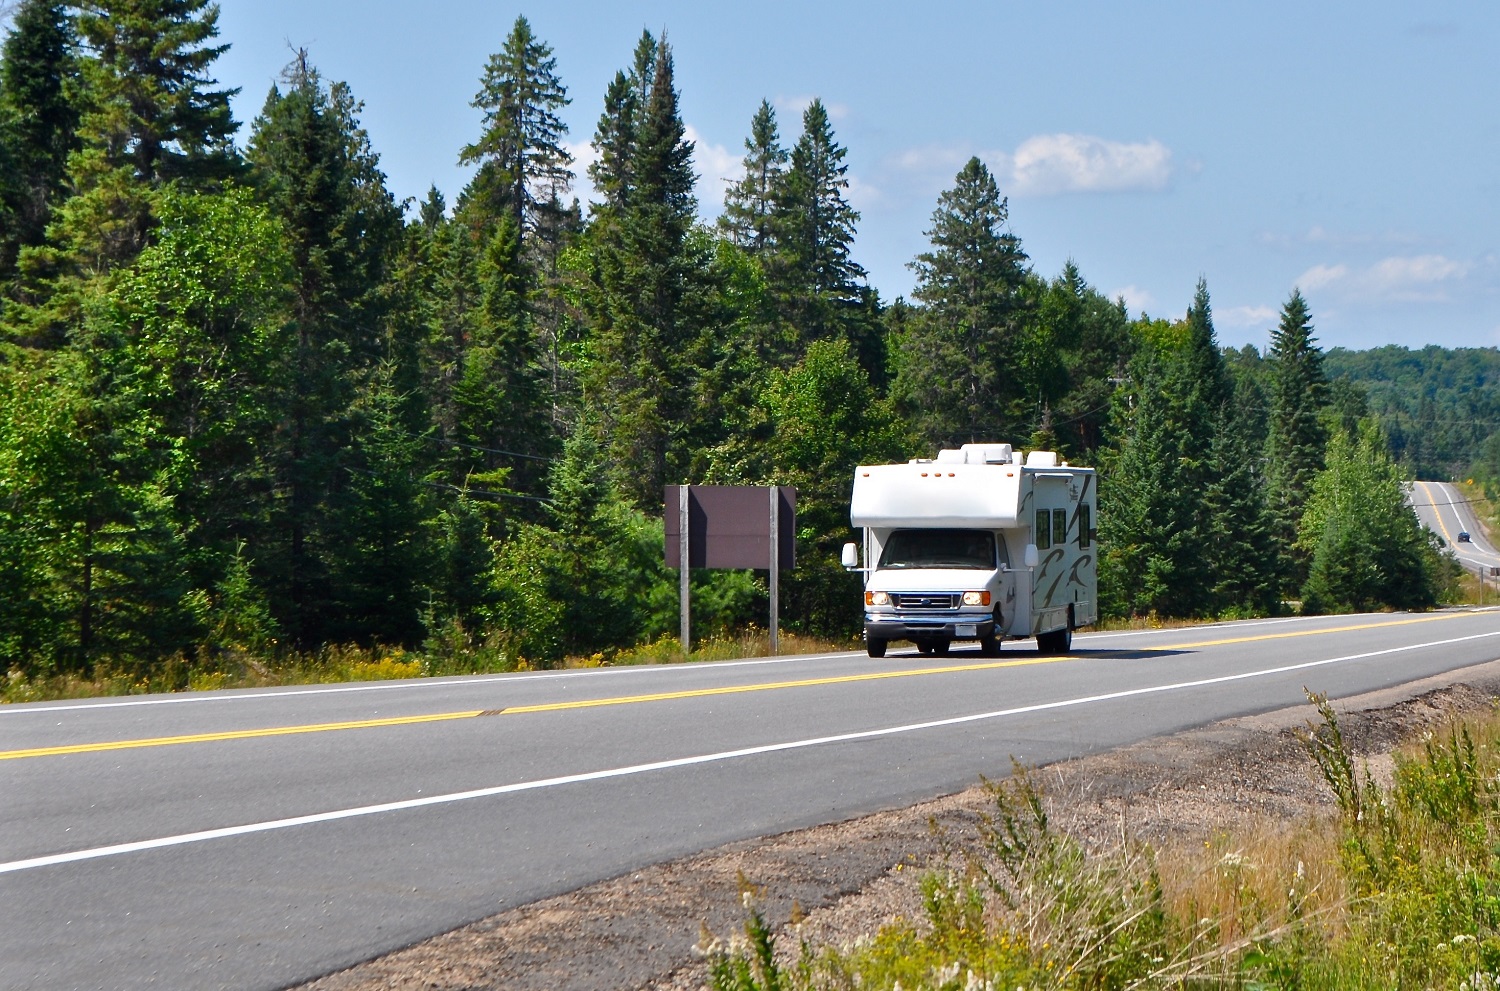 Kids Love Travel: Costs of a camper holiday in the States